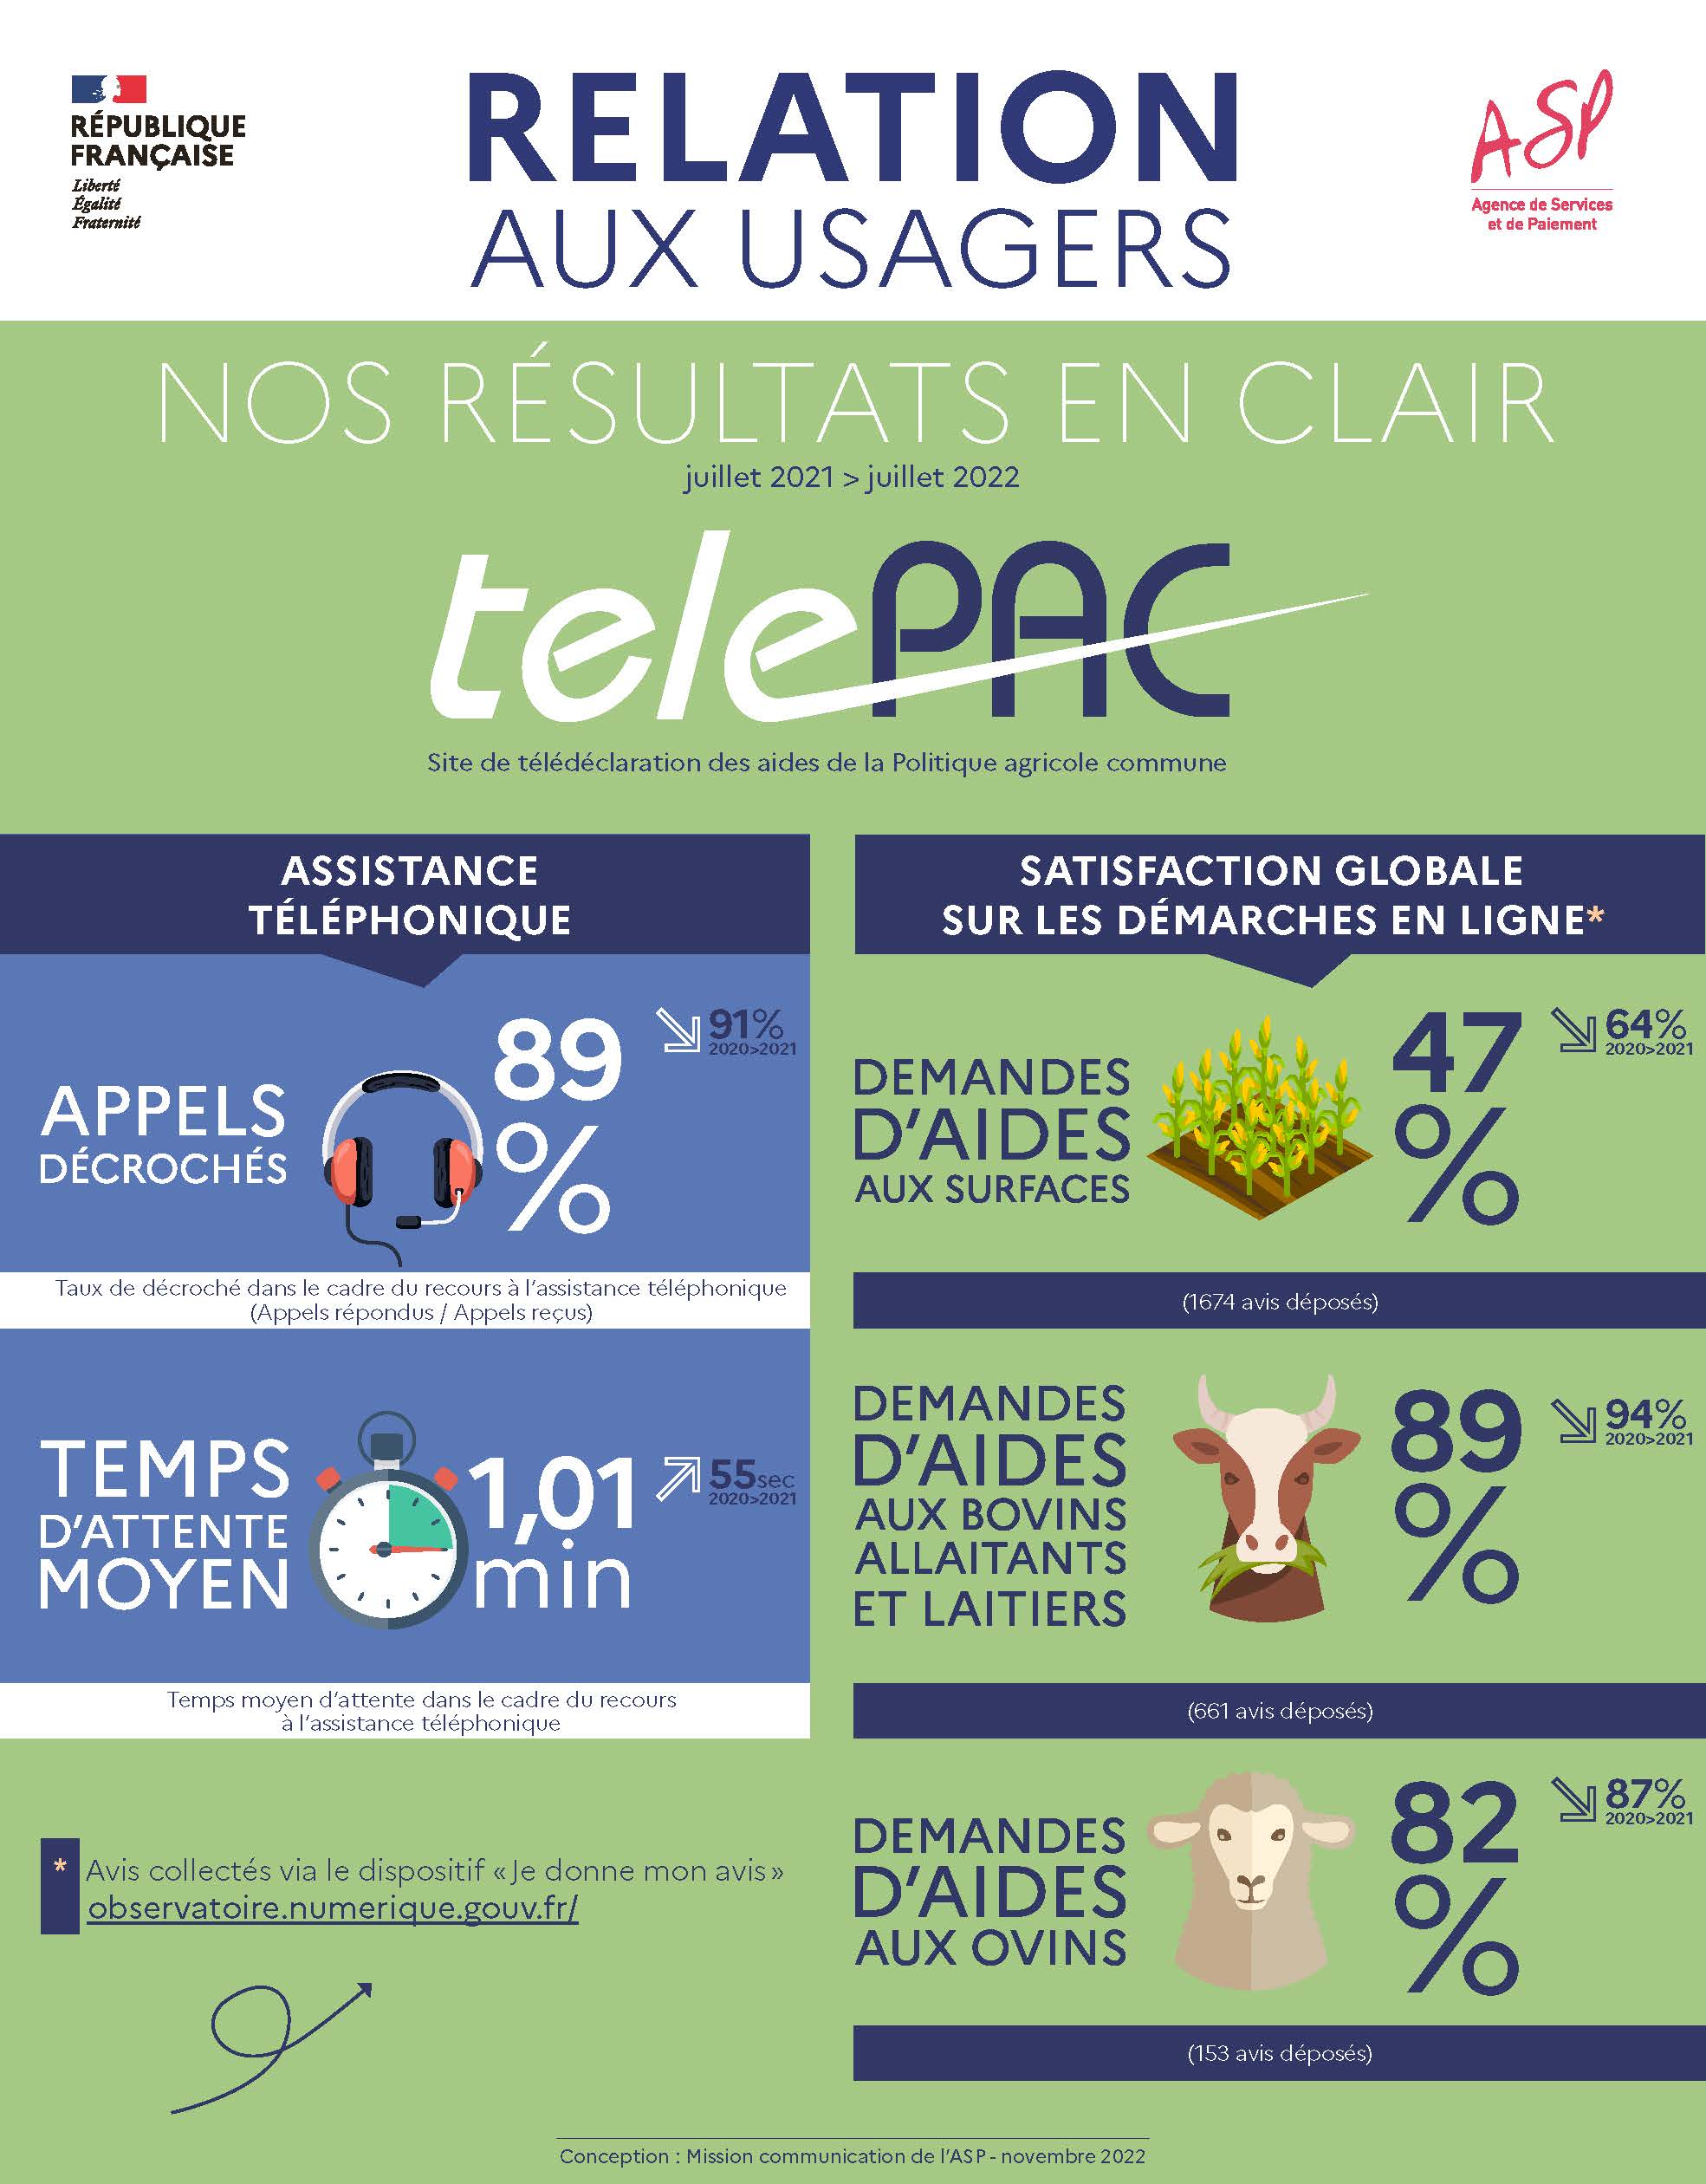 Relation aux usagers - Telepac